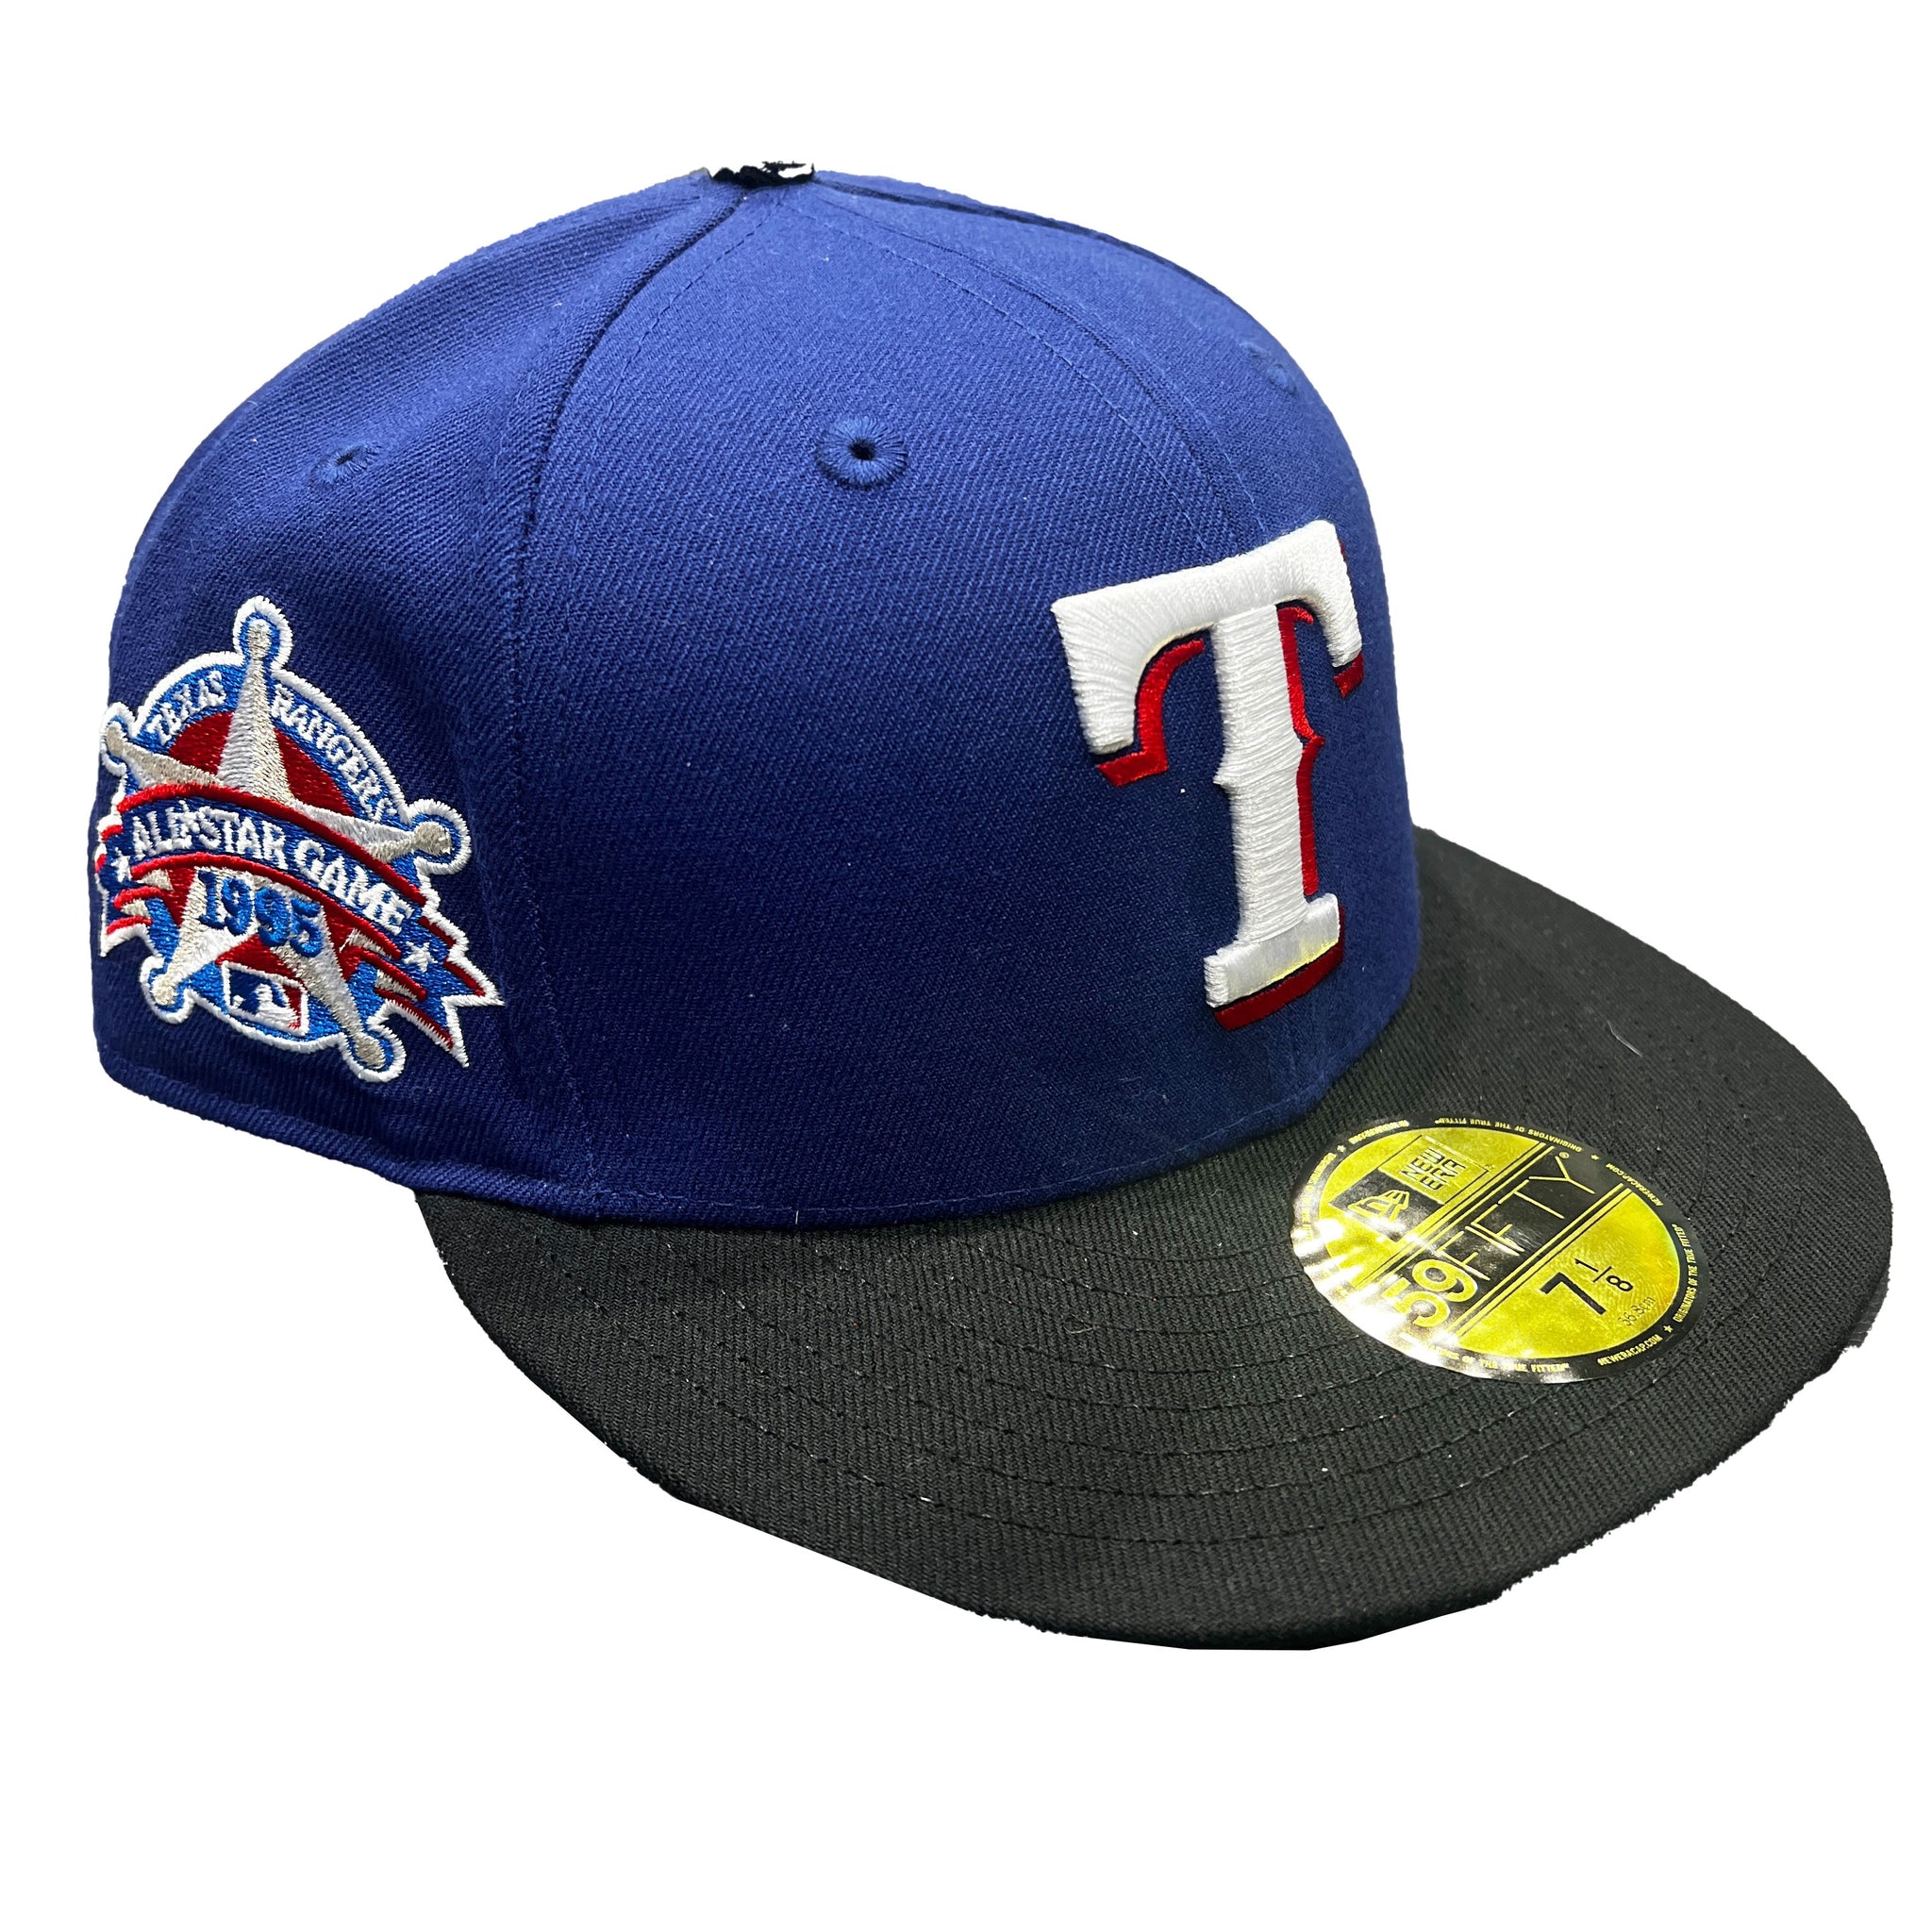 New Era Texas Rangers All Star Game Patch Fitted Hat